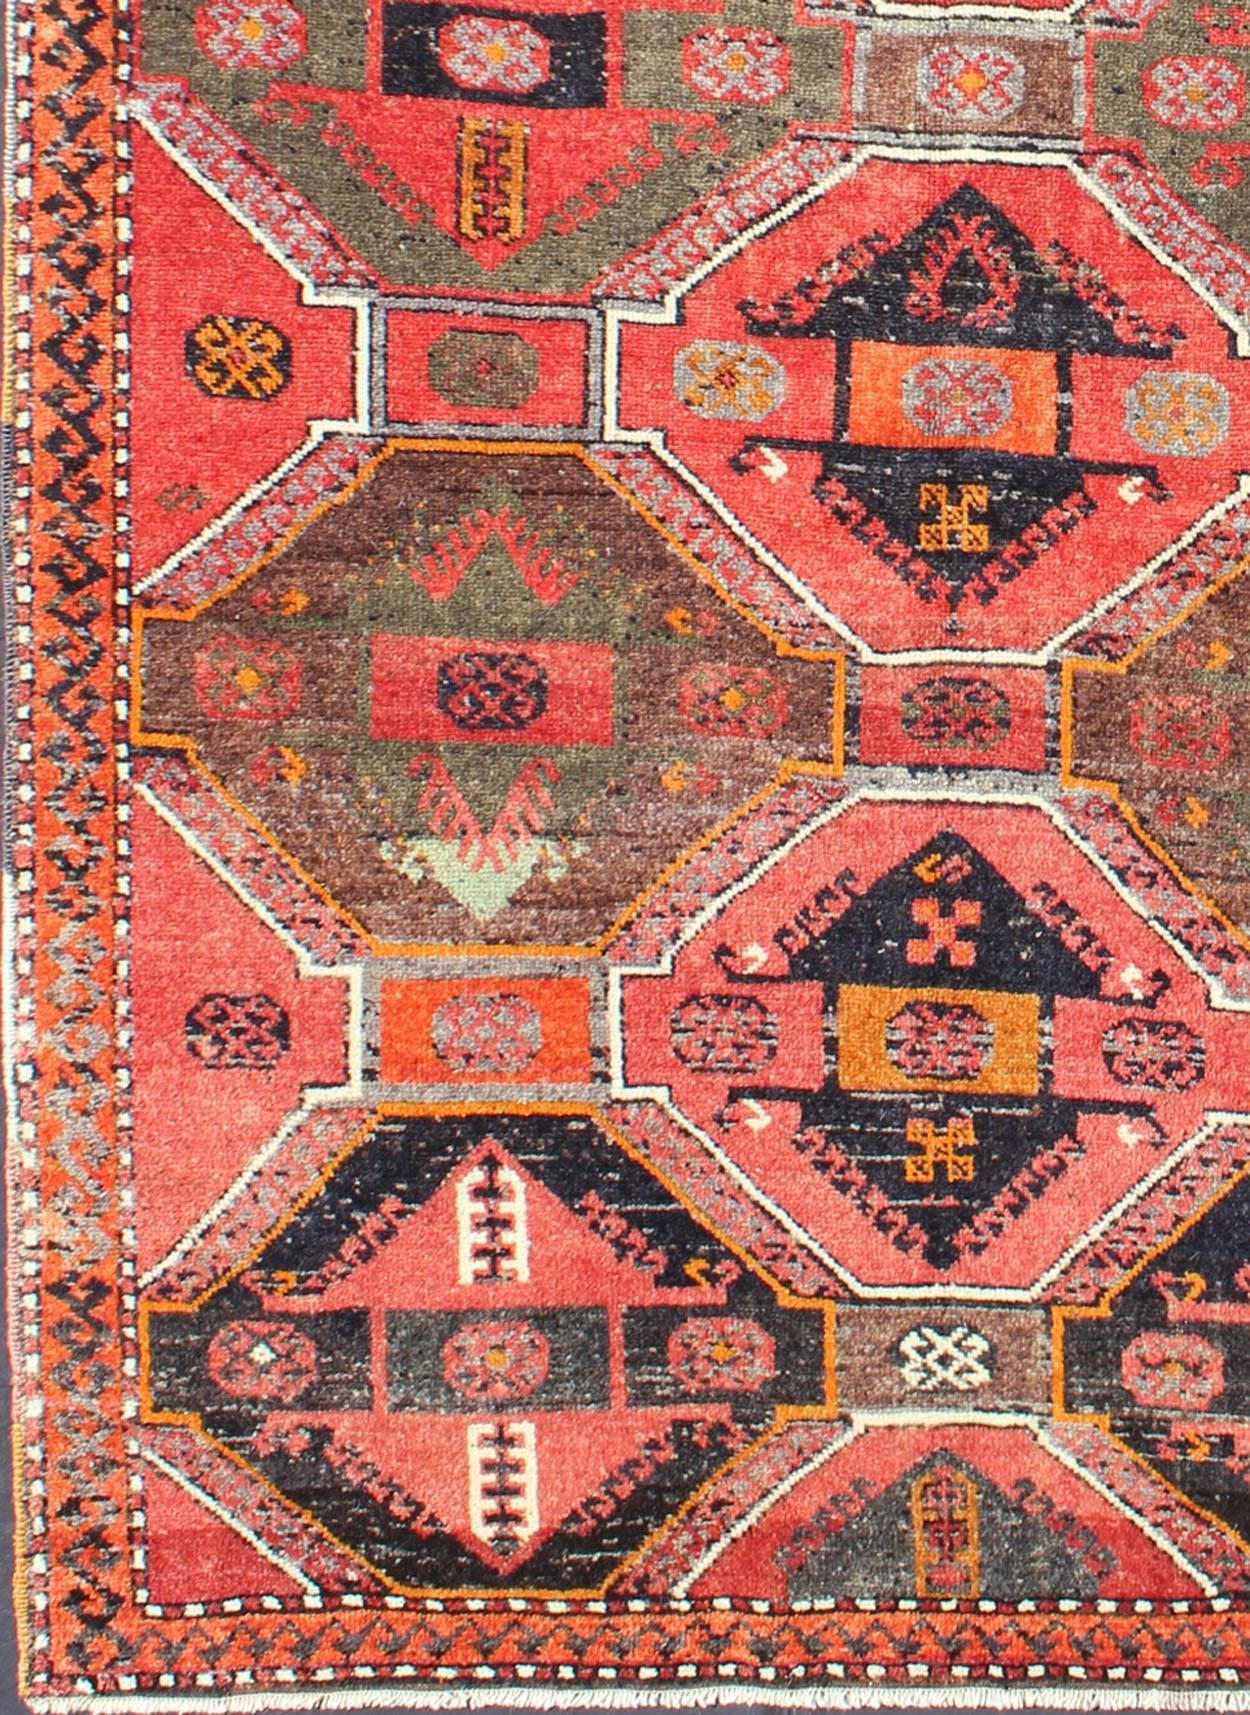 Measures: 3'10'' x 6'9''.
This Turkish Oushak gallery rug (circa mid-20th Century) features an assortment of geometric medallions that take center stage on a bright red field. The border reveals a design with tribal inspiration rendered in soft